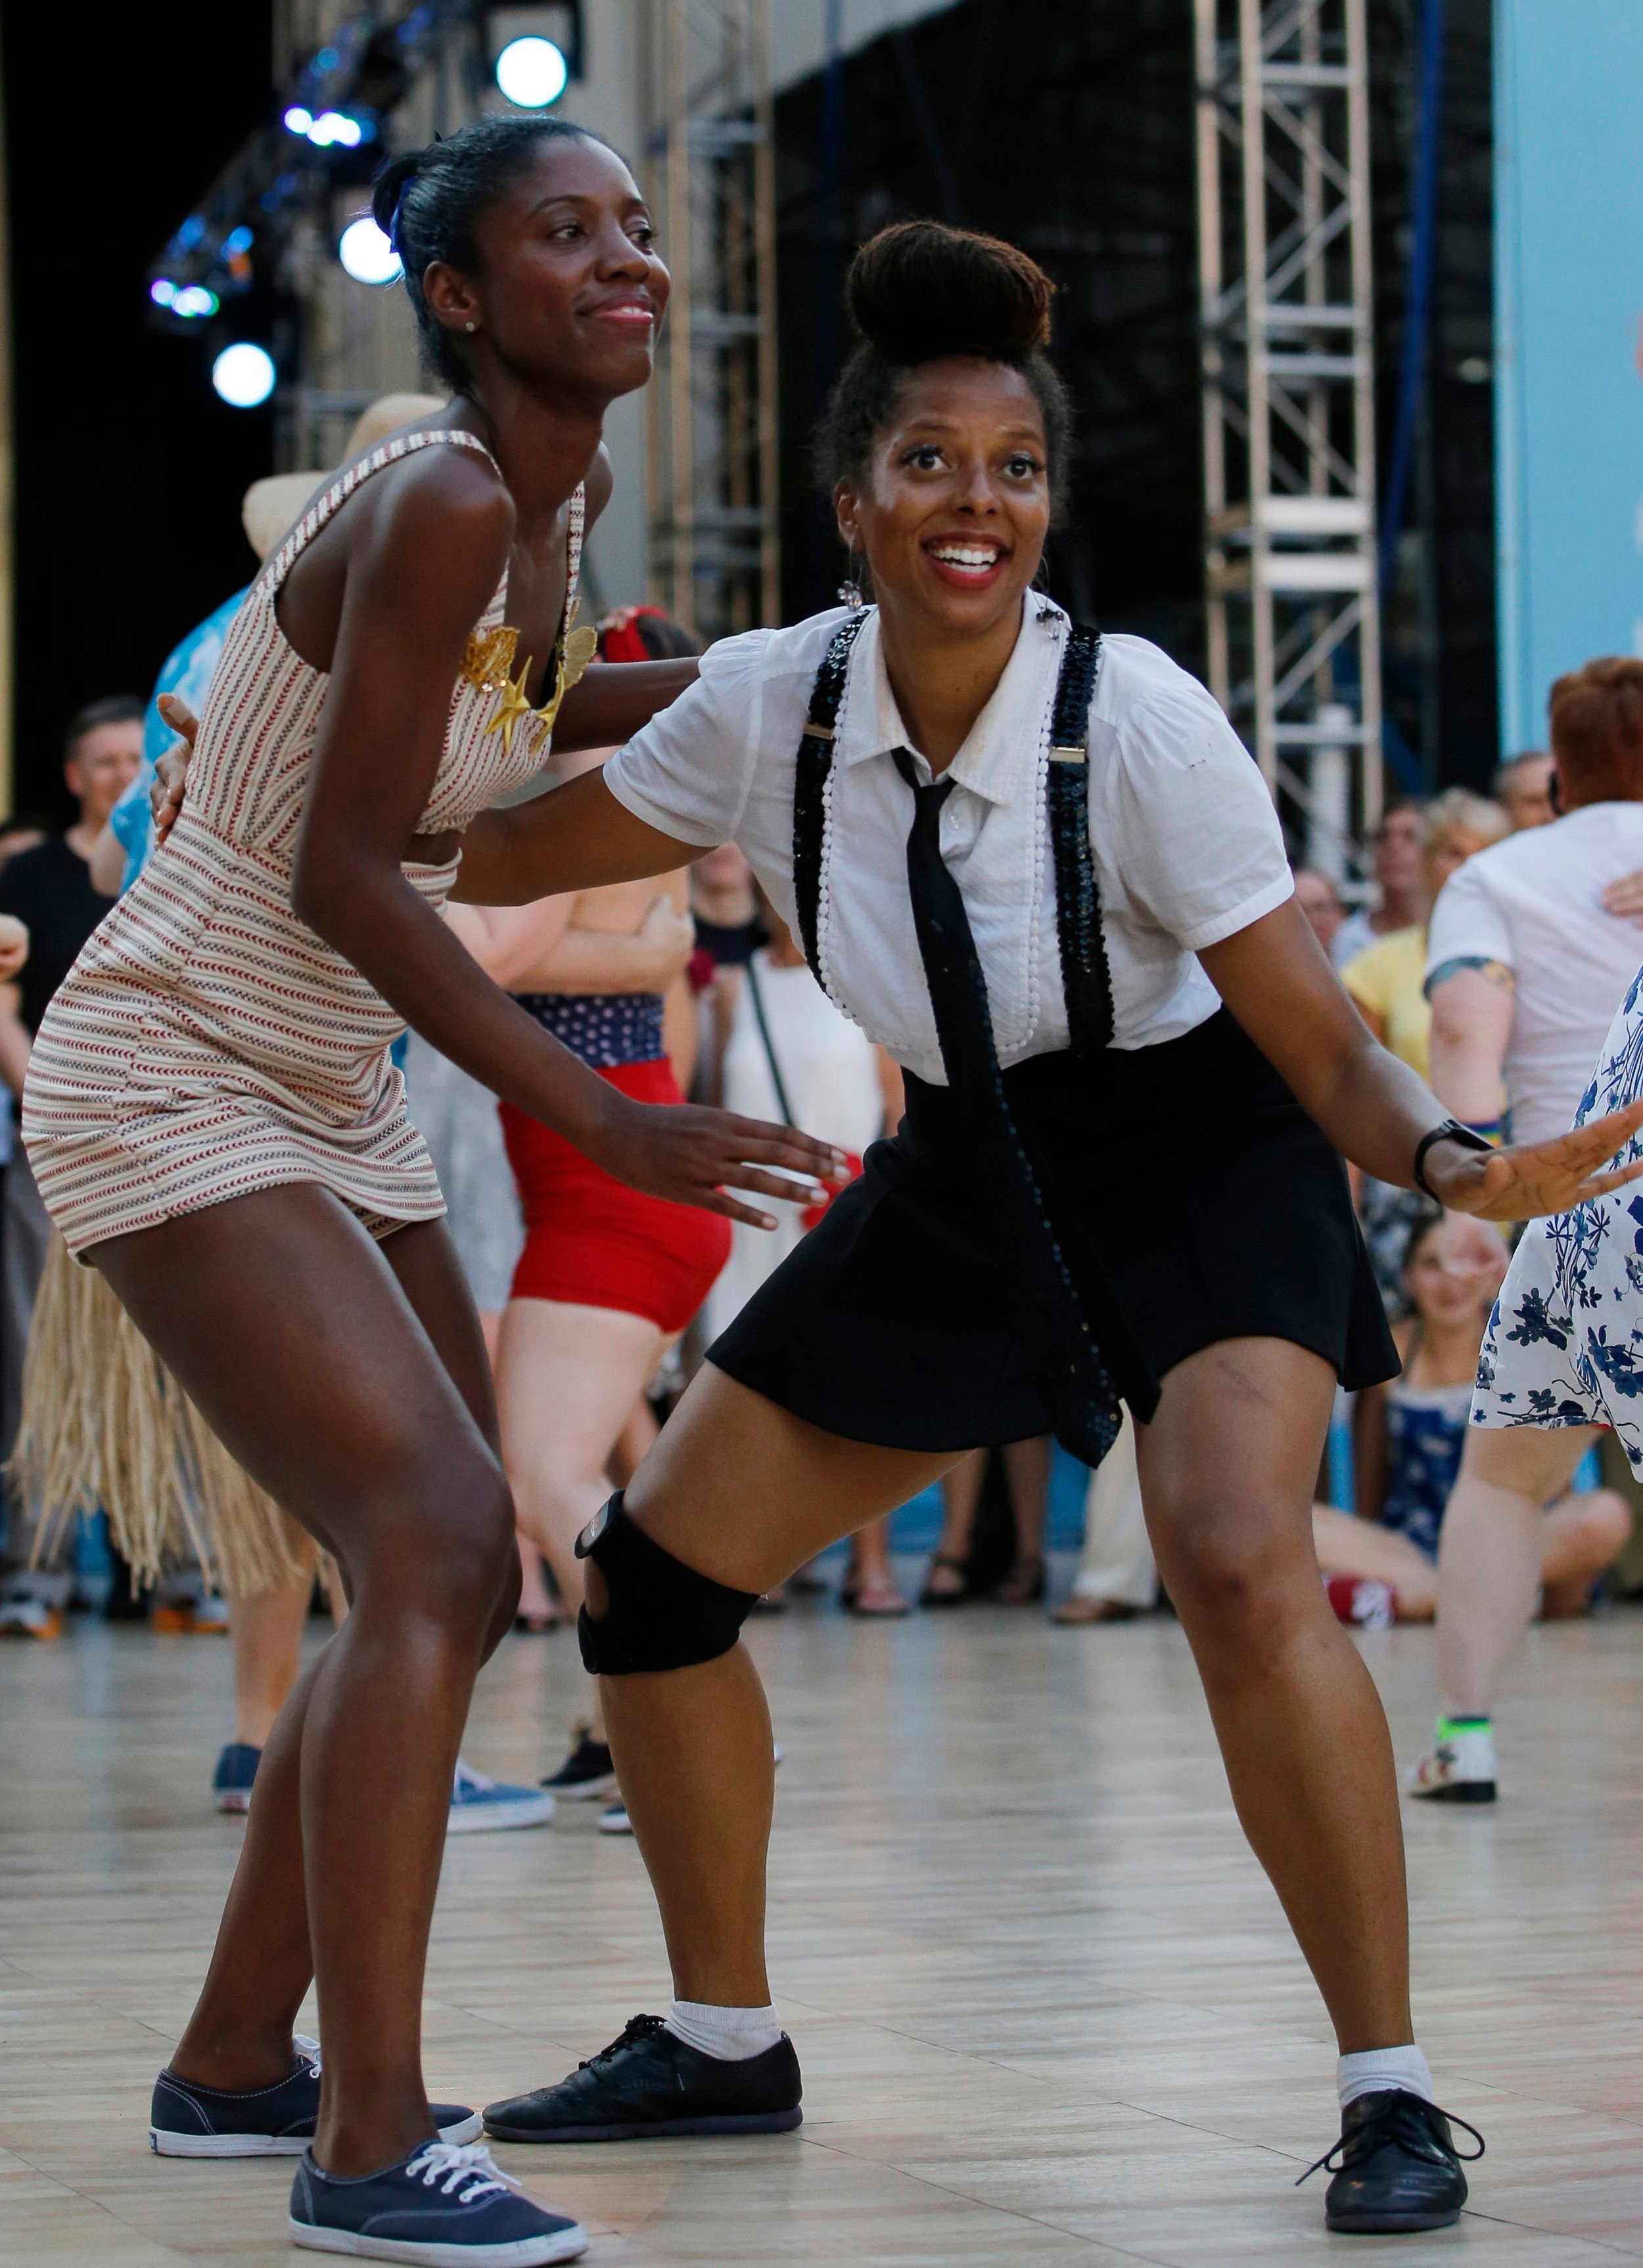  Two young women from the Brooklyn Bombshells, a Brooklyn-based dance group, perform on the dance floor during Midsummer Night Swing, an outdoor public dance series at Lincoln Center's Damrosch park, Wednesday, July 6, 2016, in New York. The women jo